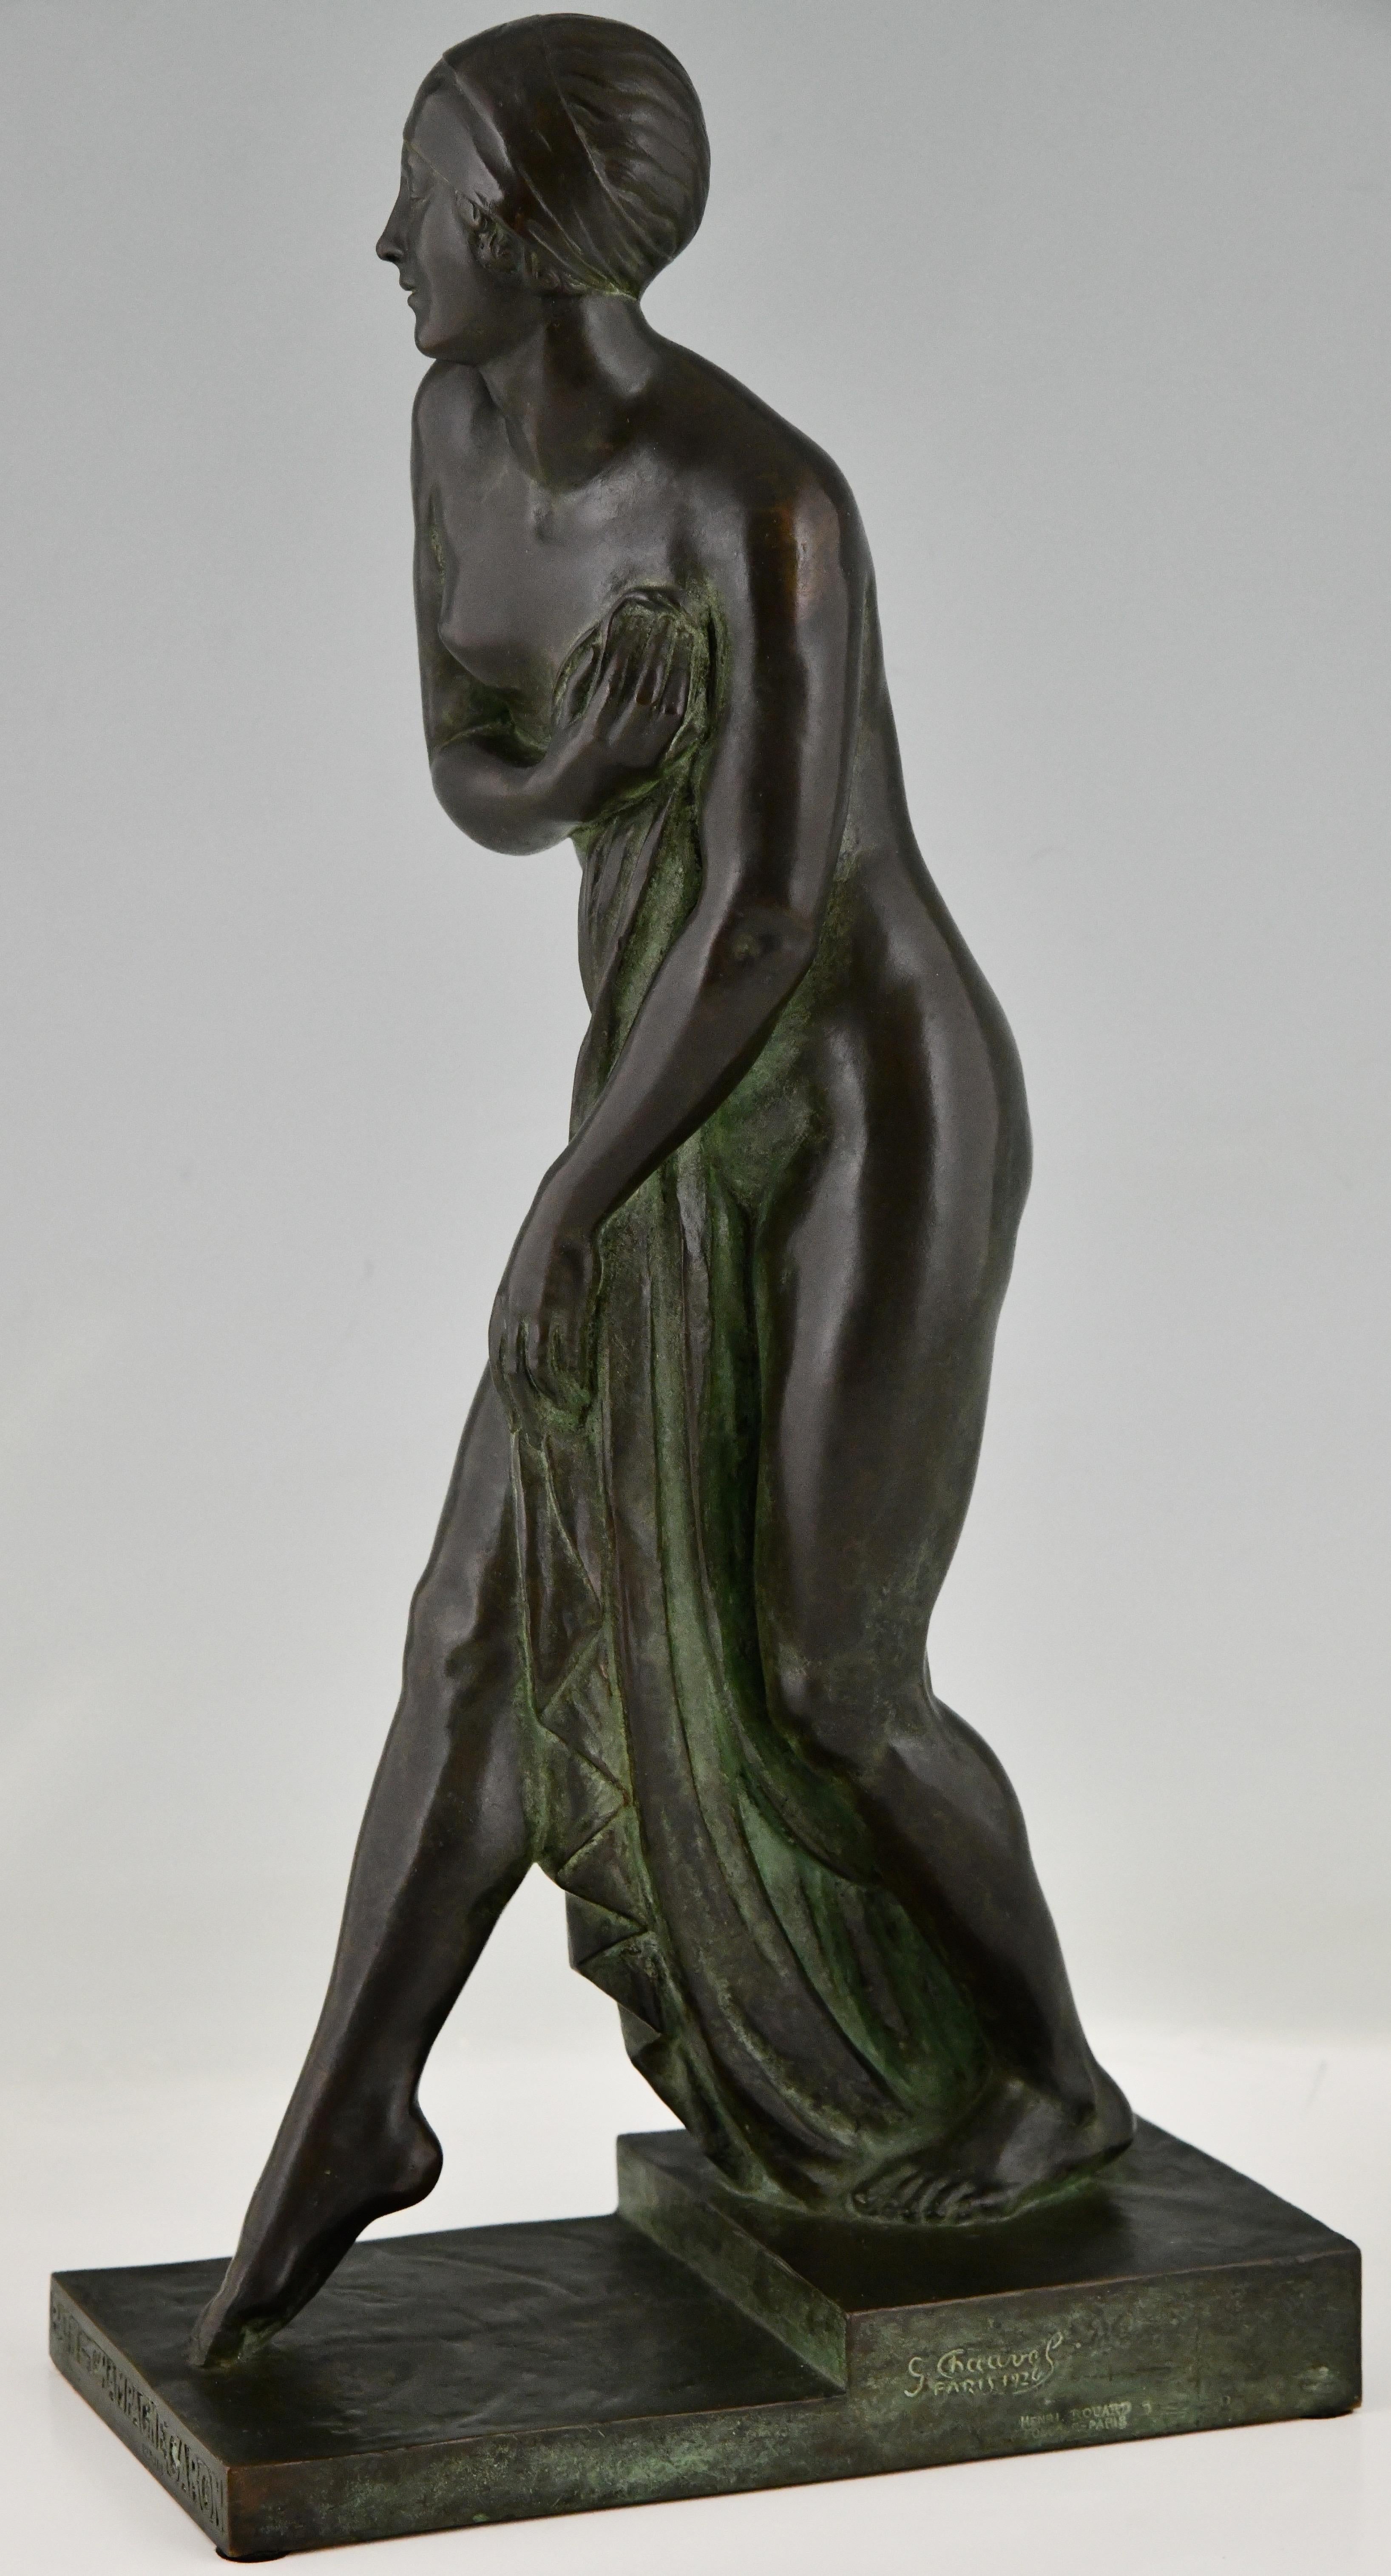 Art Deco bronze sculpture of a bathing nude, Bain de Champagne Caron by Georges Chauvel dated 1926, with the foundry mark of Henri Rouard fondeur Paris. 
Beautiful patina.
This sculpture is illustrated in:
Bronzes, sculptors and founders by H.